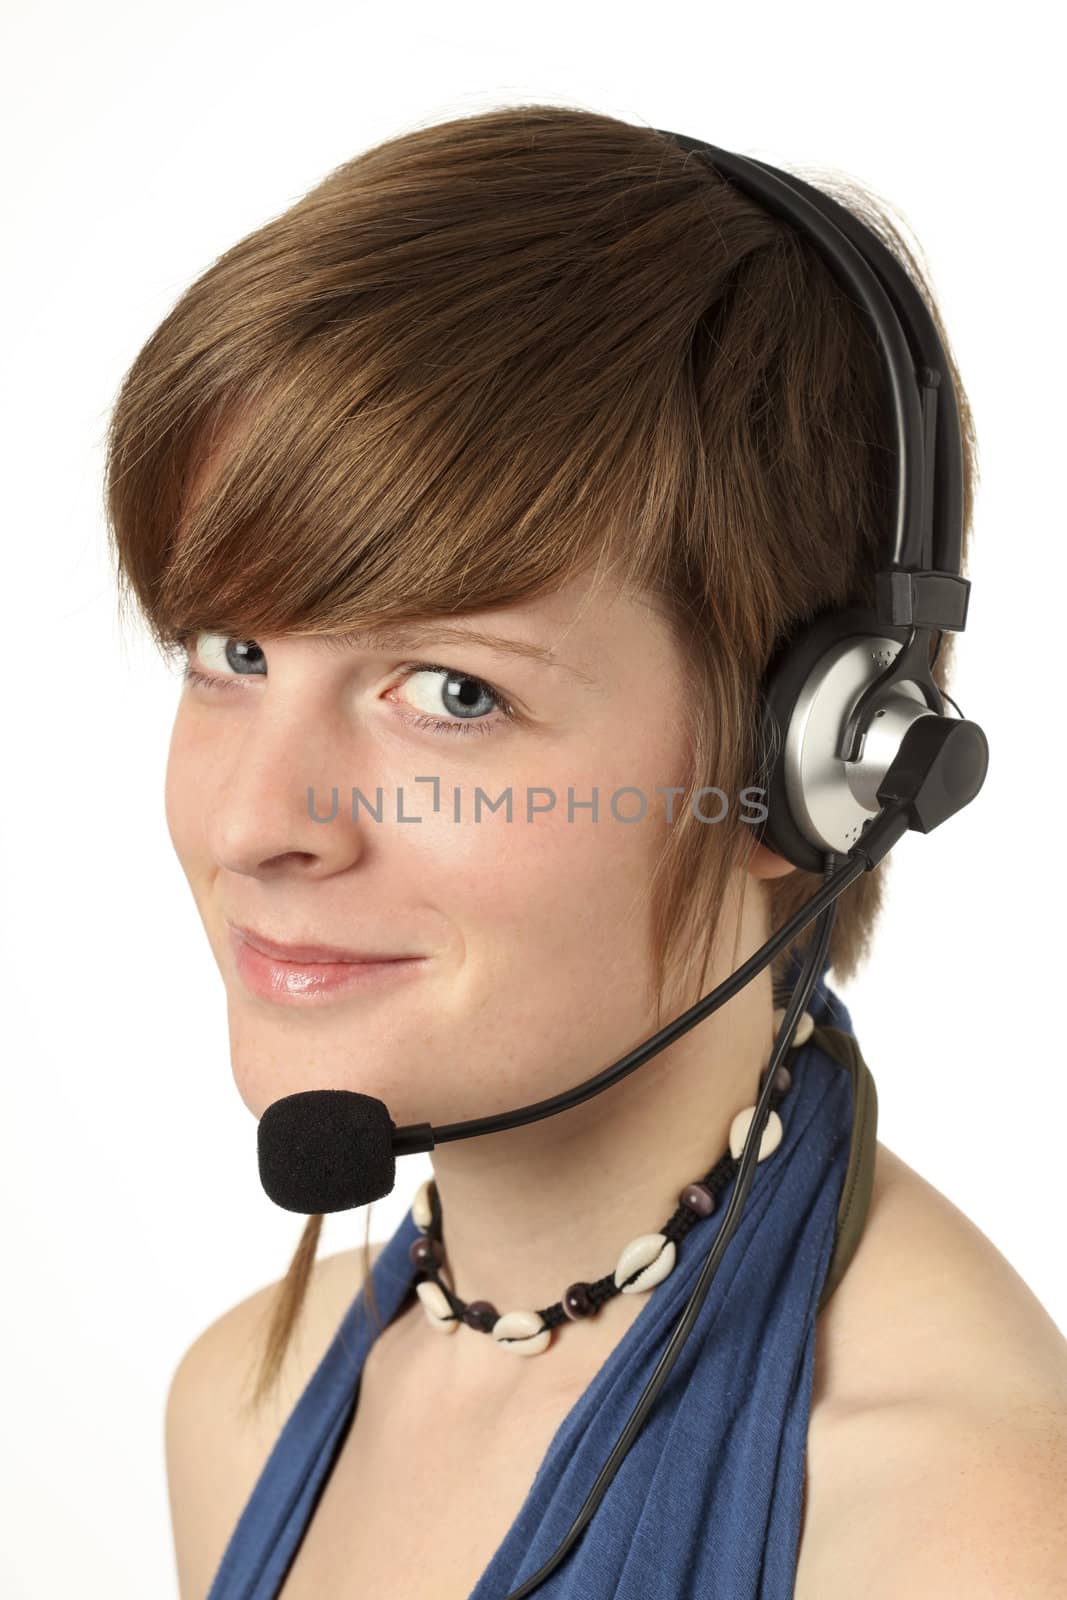 women with headset by RainerPlendl